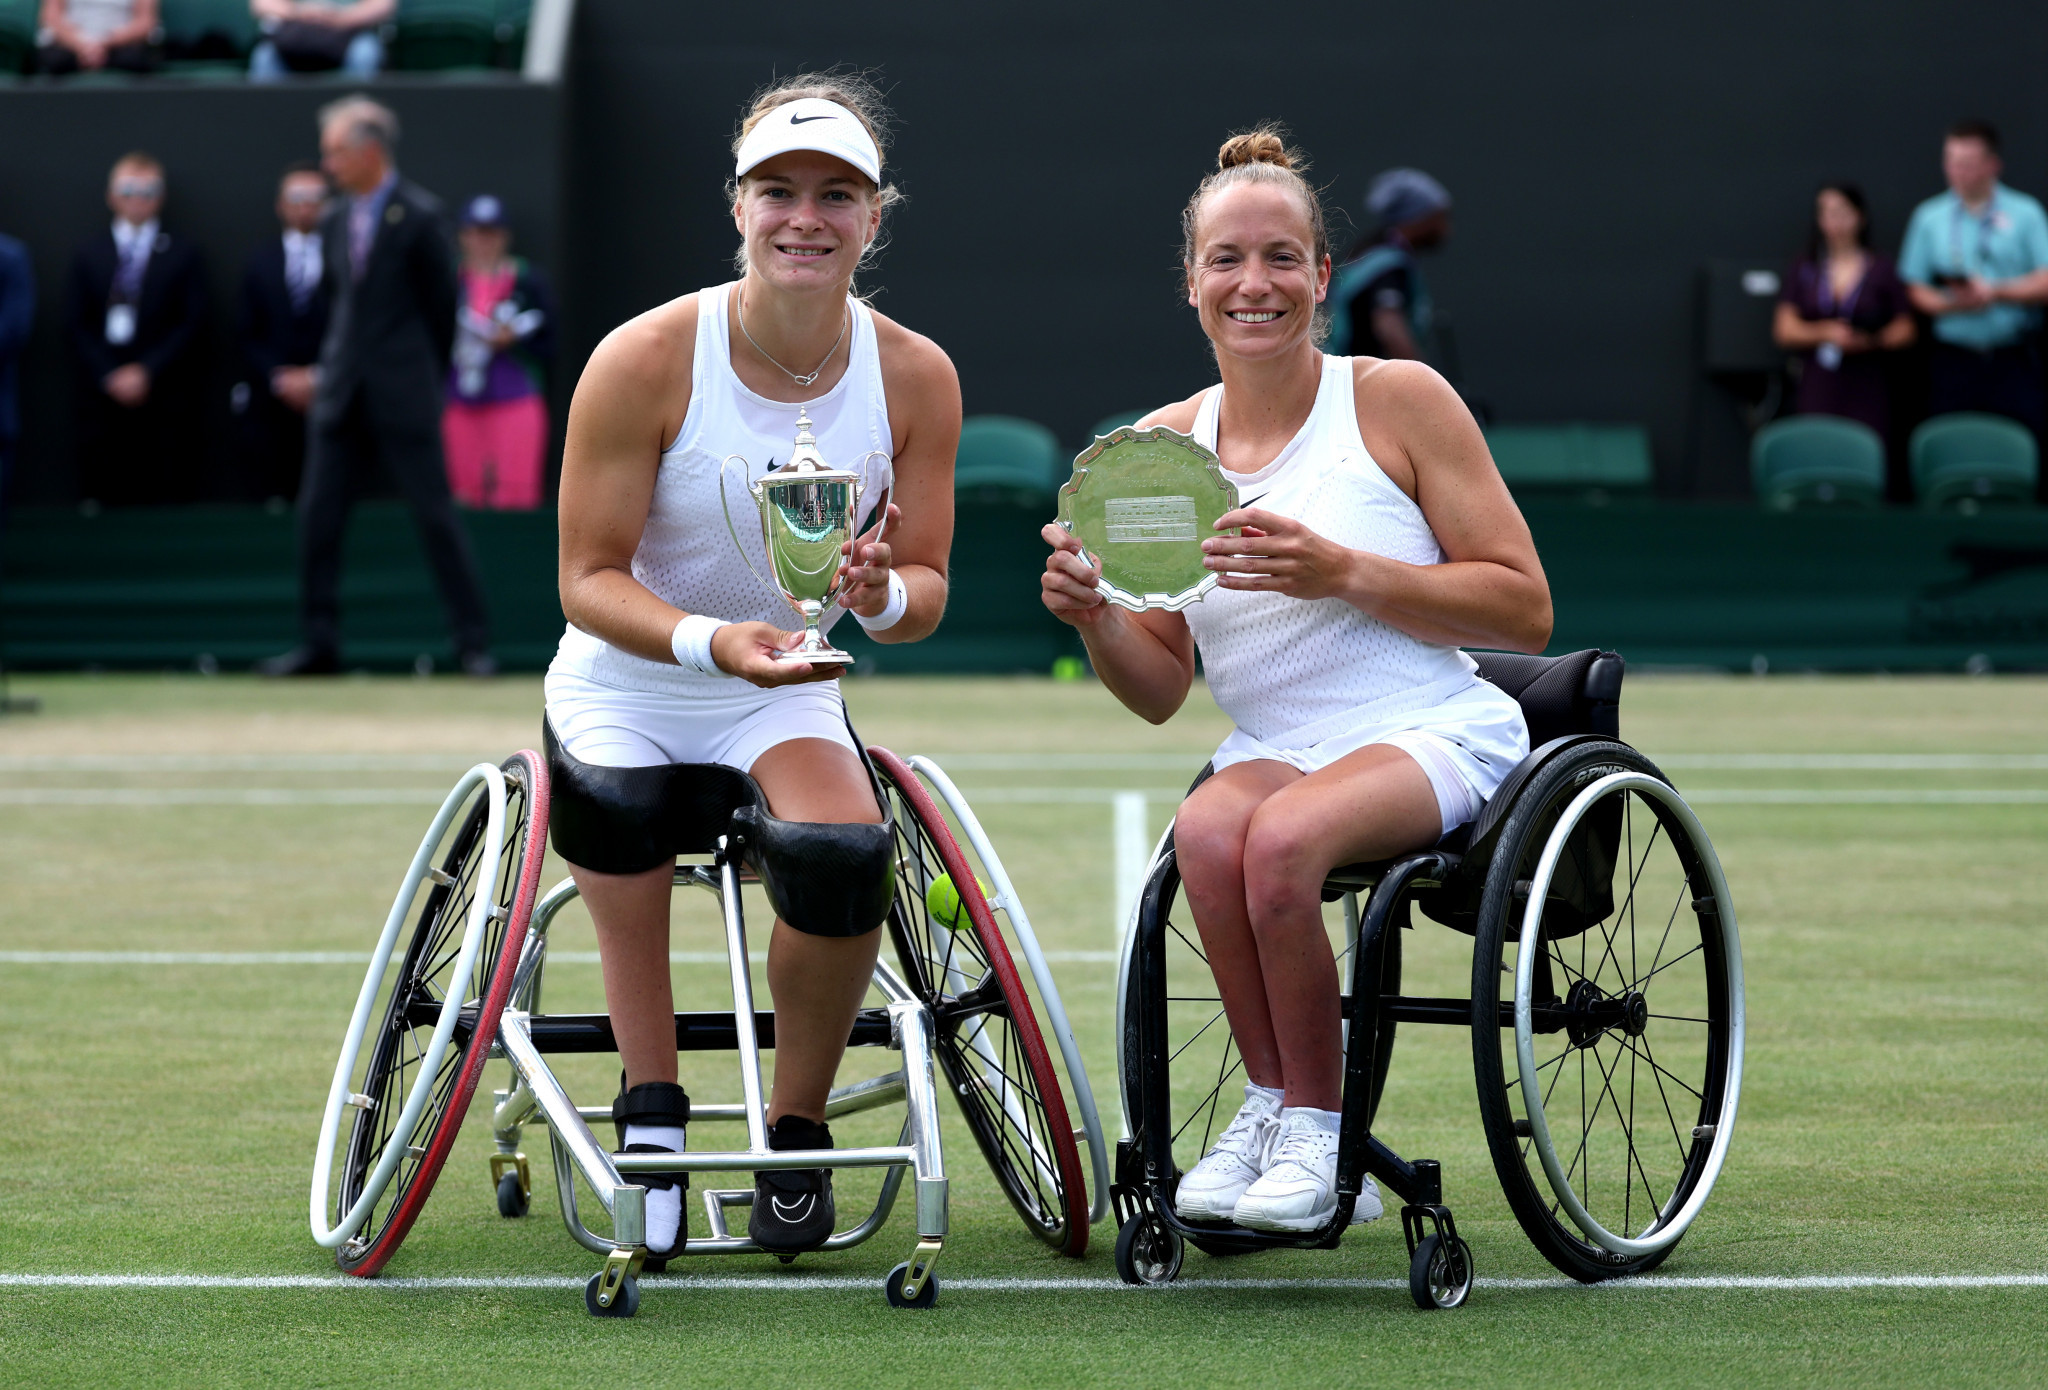 Diede de Groot of The Netherlands, left, defeated her doubles partner Jiske Griffioen 6-2, 6-1 to win her 11th successive Grand Slam women’s wheelchair singles title ©Getty Images 